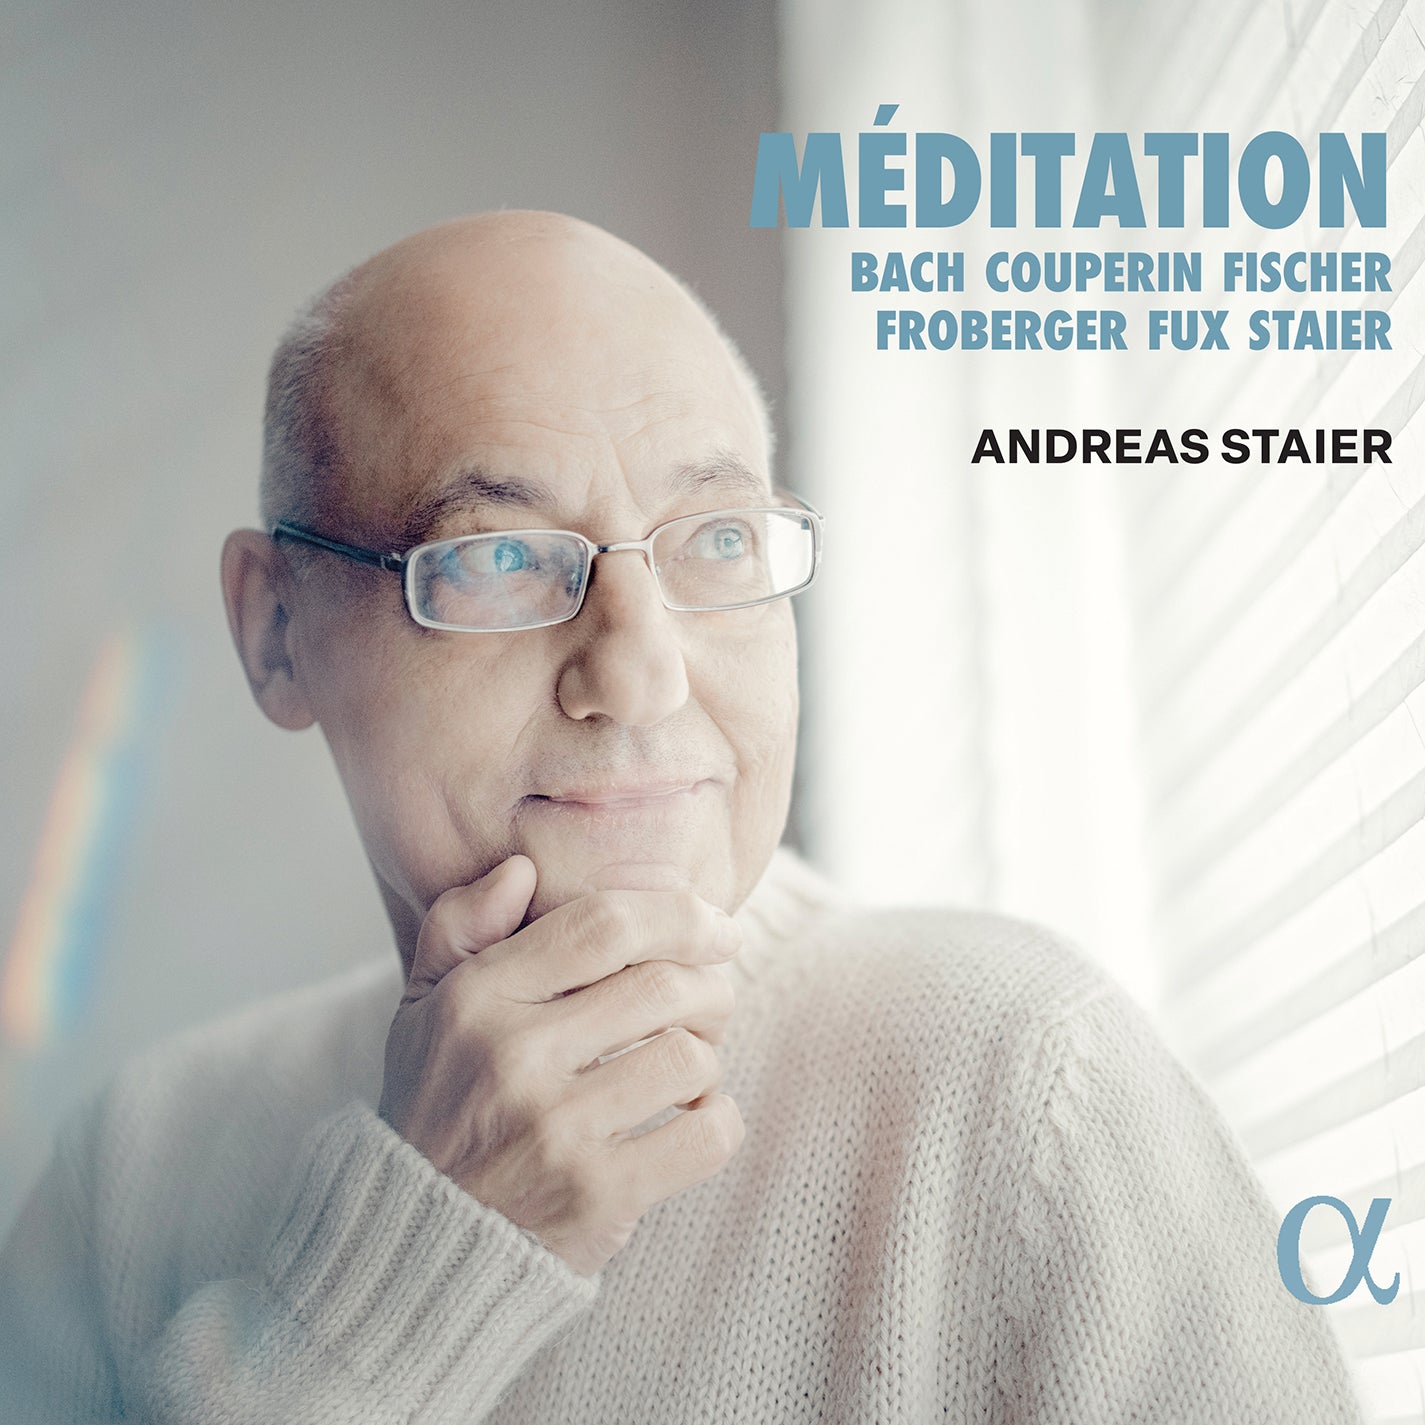 Méditation: Keyboard Works by Bach, Couperin & Others / Andreas Staier